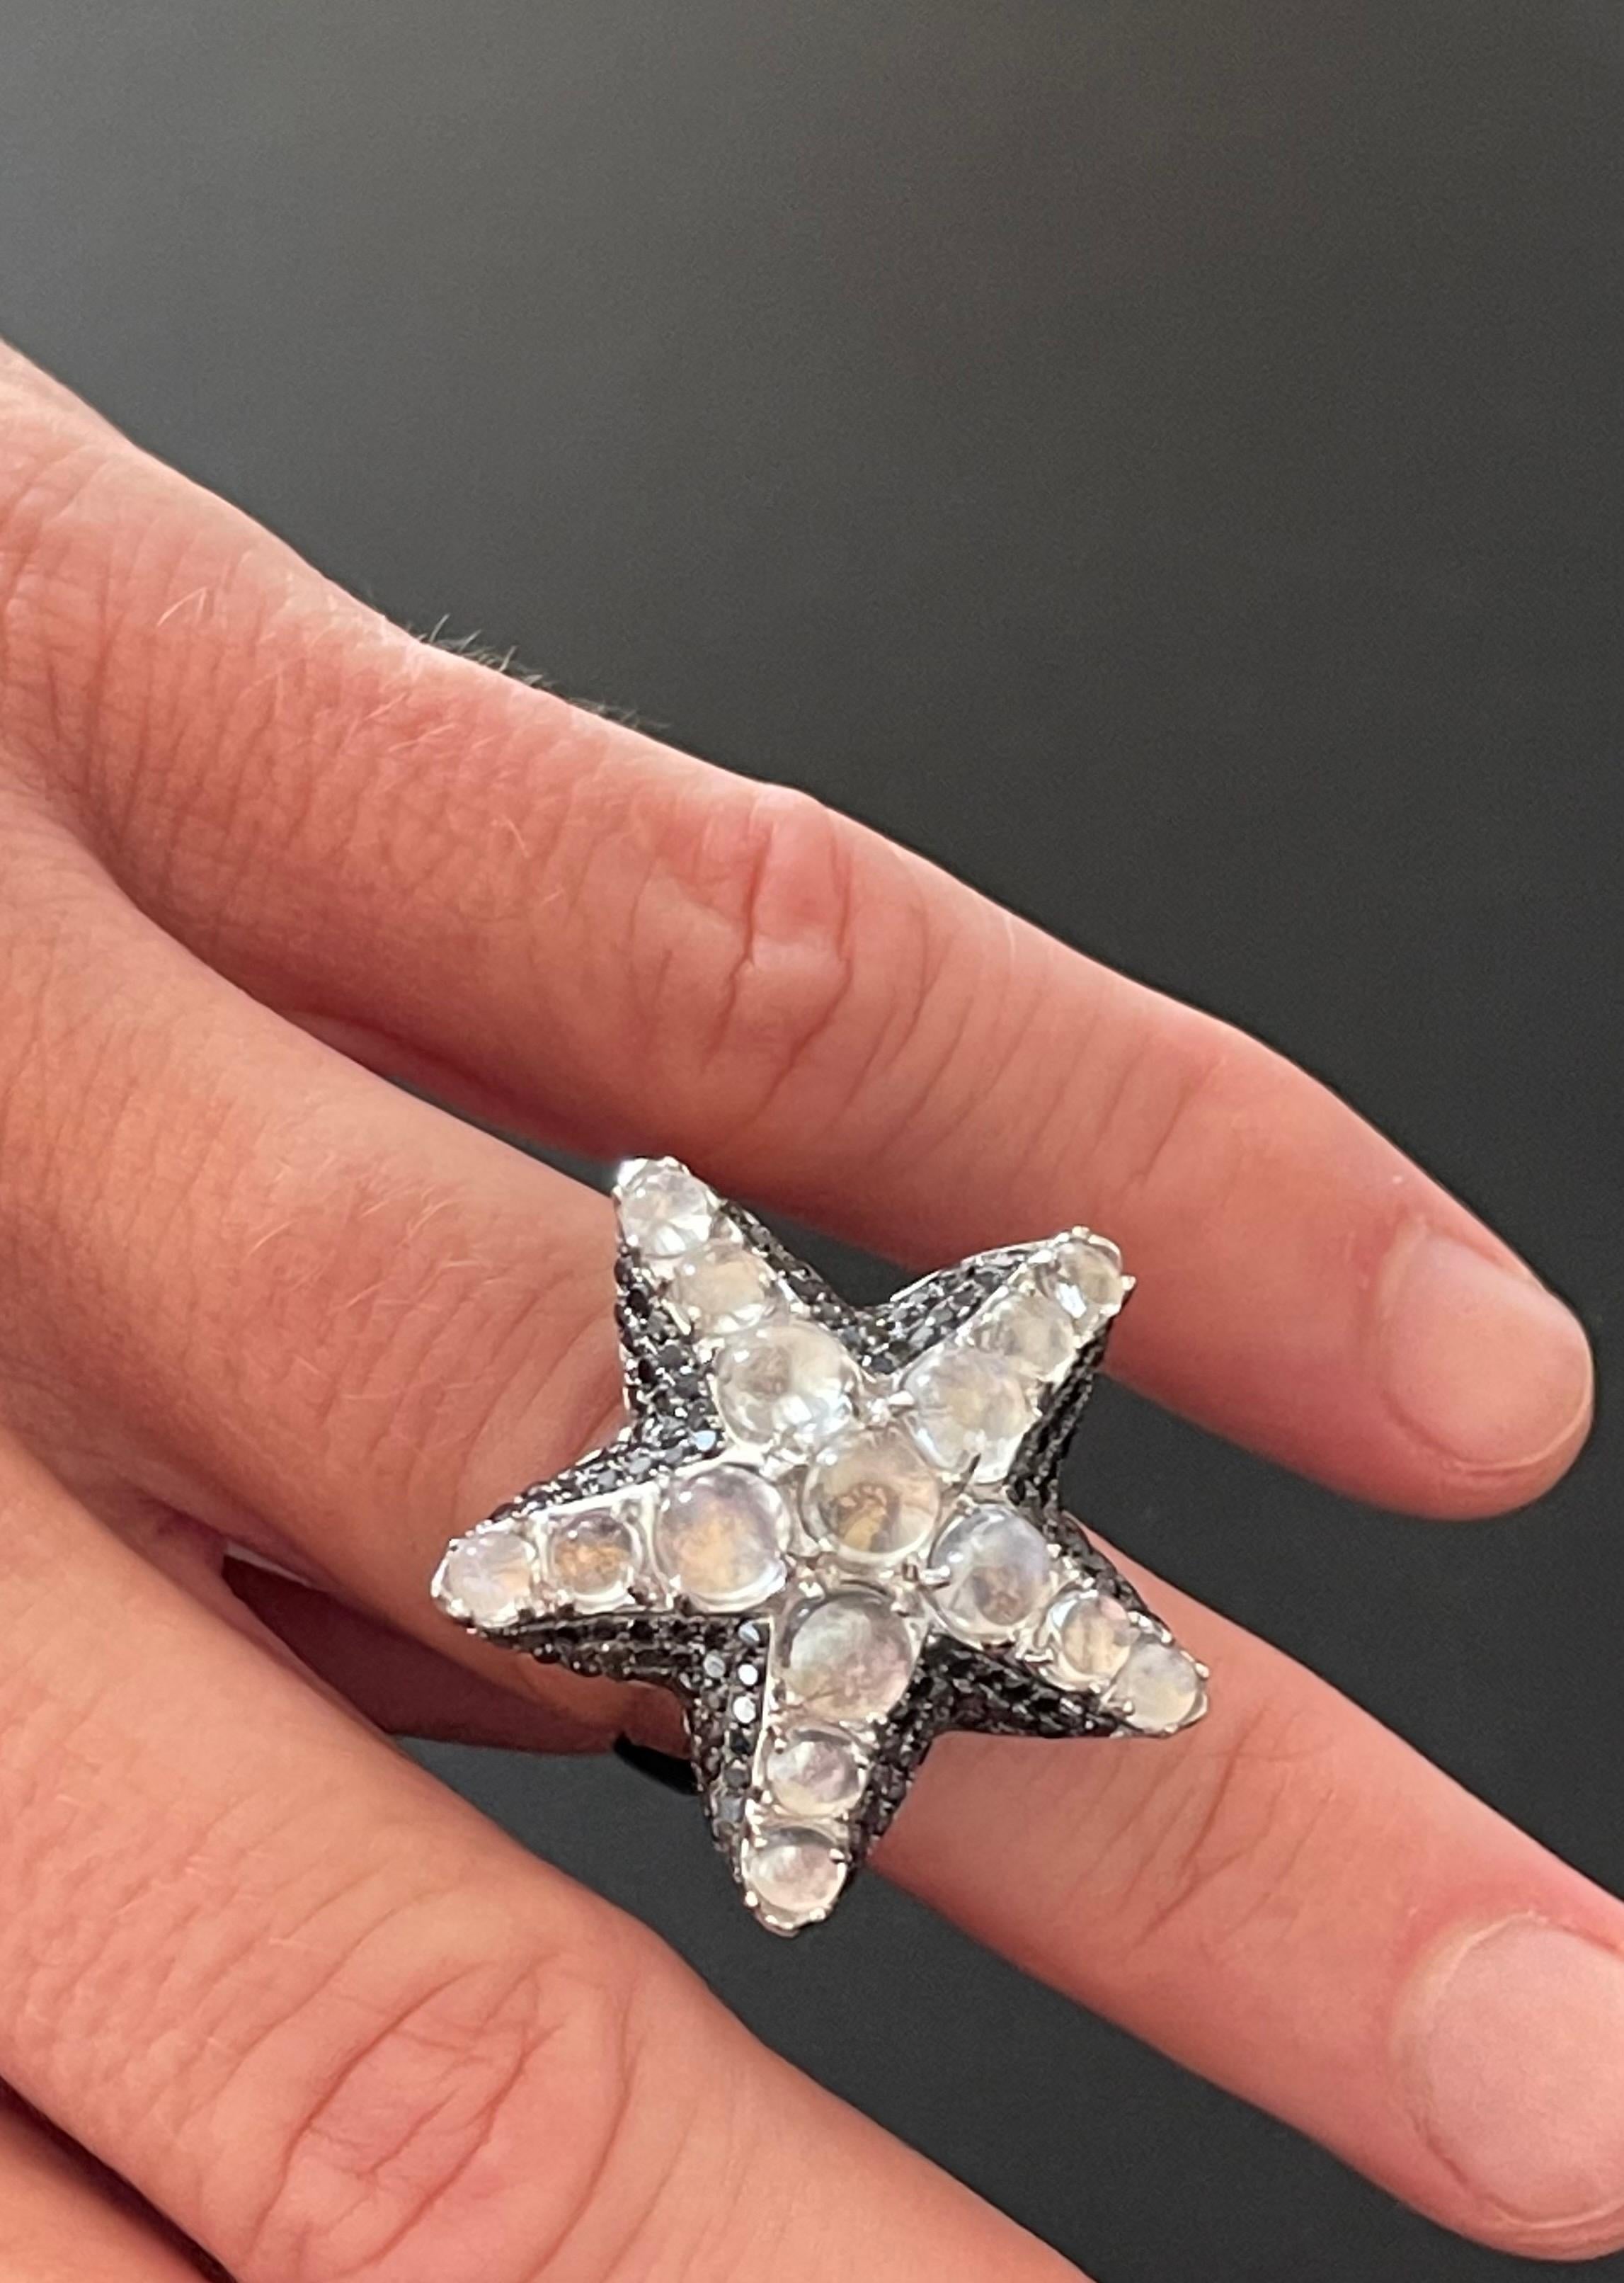 18 K white Gold Starfish Ring featuring 16 Moonstone Cabochons weighing 5.13 ct, framed by 134 black Diamonds with a tortal weight of 1.51 ct. 
The mystic alallure of this ring is simply captivating. The moonstones exhibit a blueish silvery rainbow